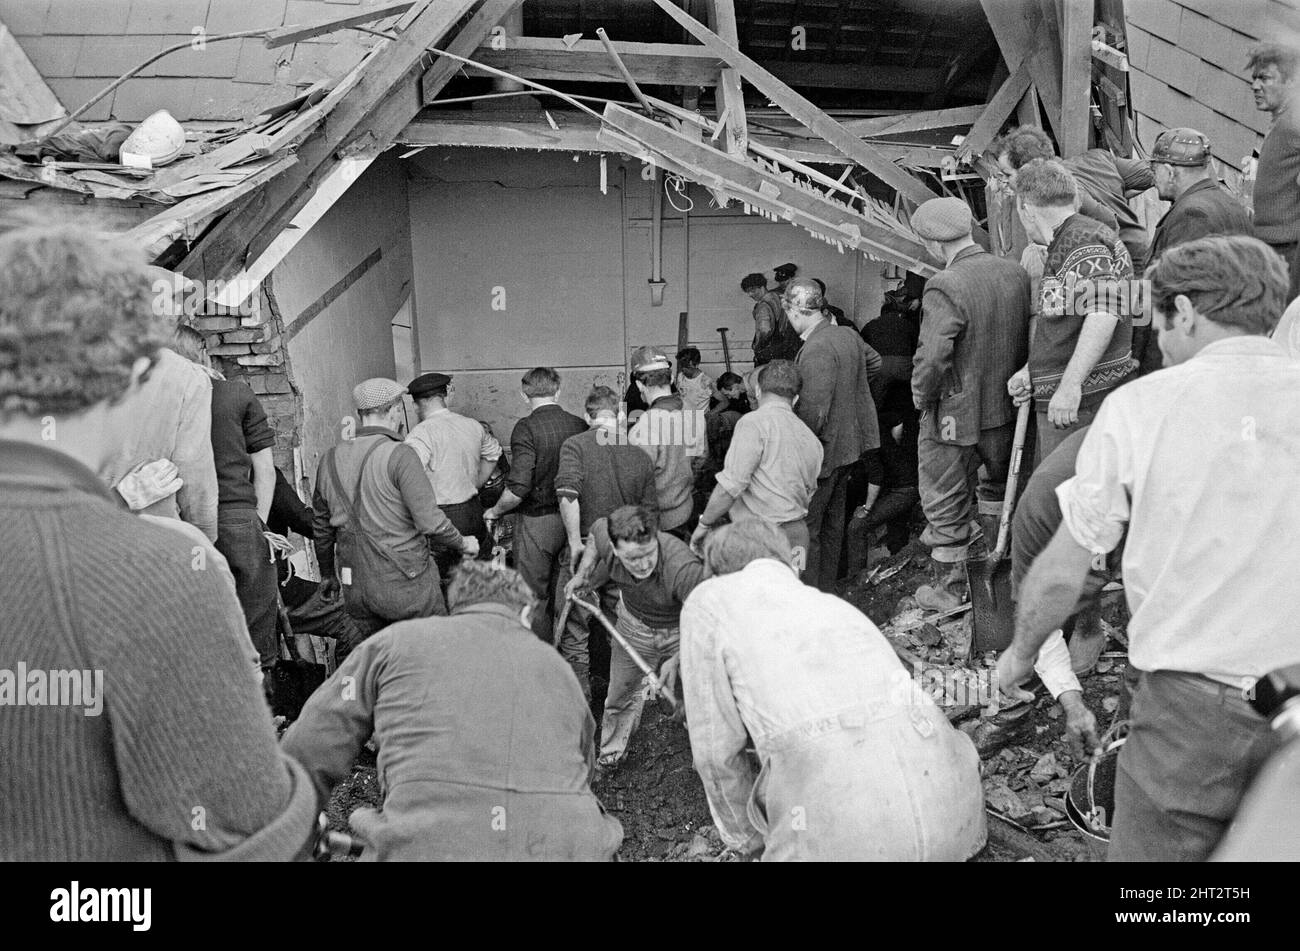 Aberfan - 21st October 1966 Local men and the emergency services hastily dig through the mud for survivors at The Pantglas Junior School.  The Aberfan disaster was a catastrophic collapse of a colliery spoil tip in the Welsh village of Aberfan, near Merthyr Tydfil. It was caused by a build-up of water in the accumulated rock and shale, which suddenly started to slide downhill in the form of slurry and engulfed The Pantglas Junior School below, on 21st October 1966, killing 116 children and 28 adults.   The original school site is now a memorial garden.   Picture taken 21st October 1966The even Stock Photo